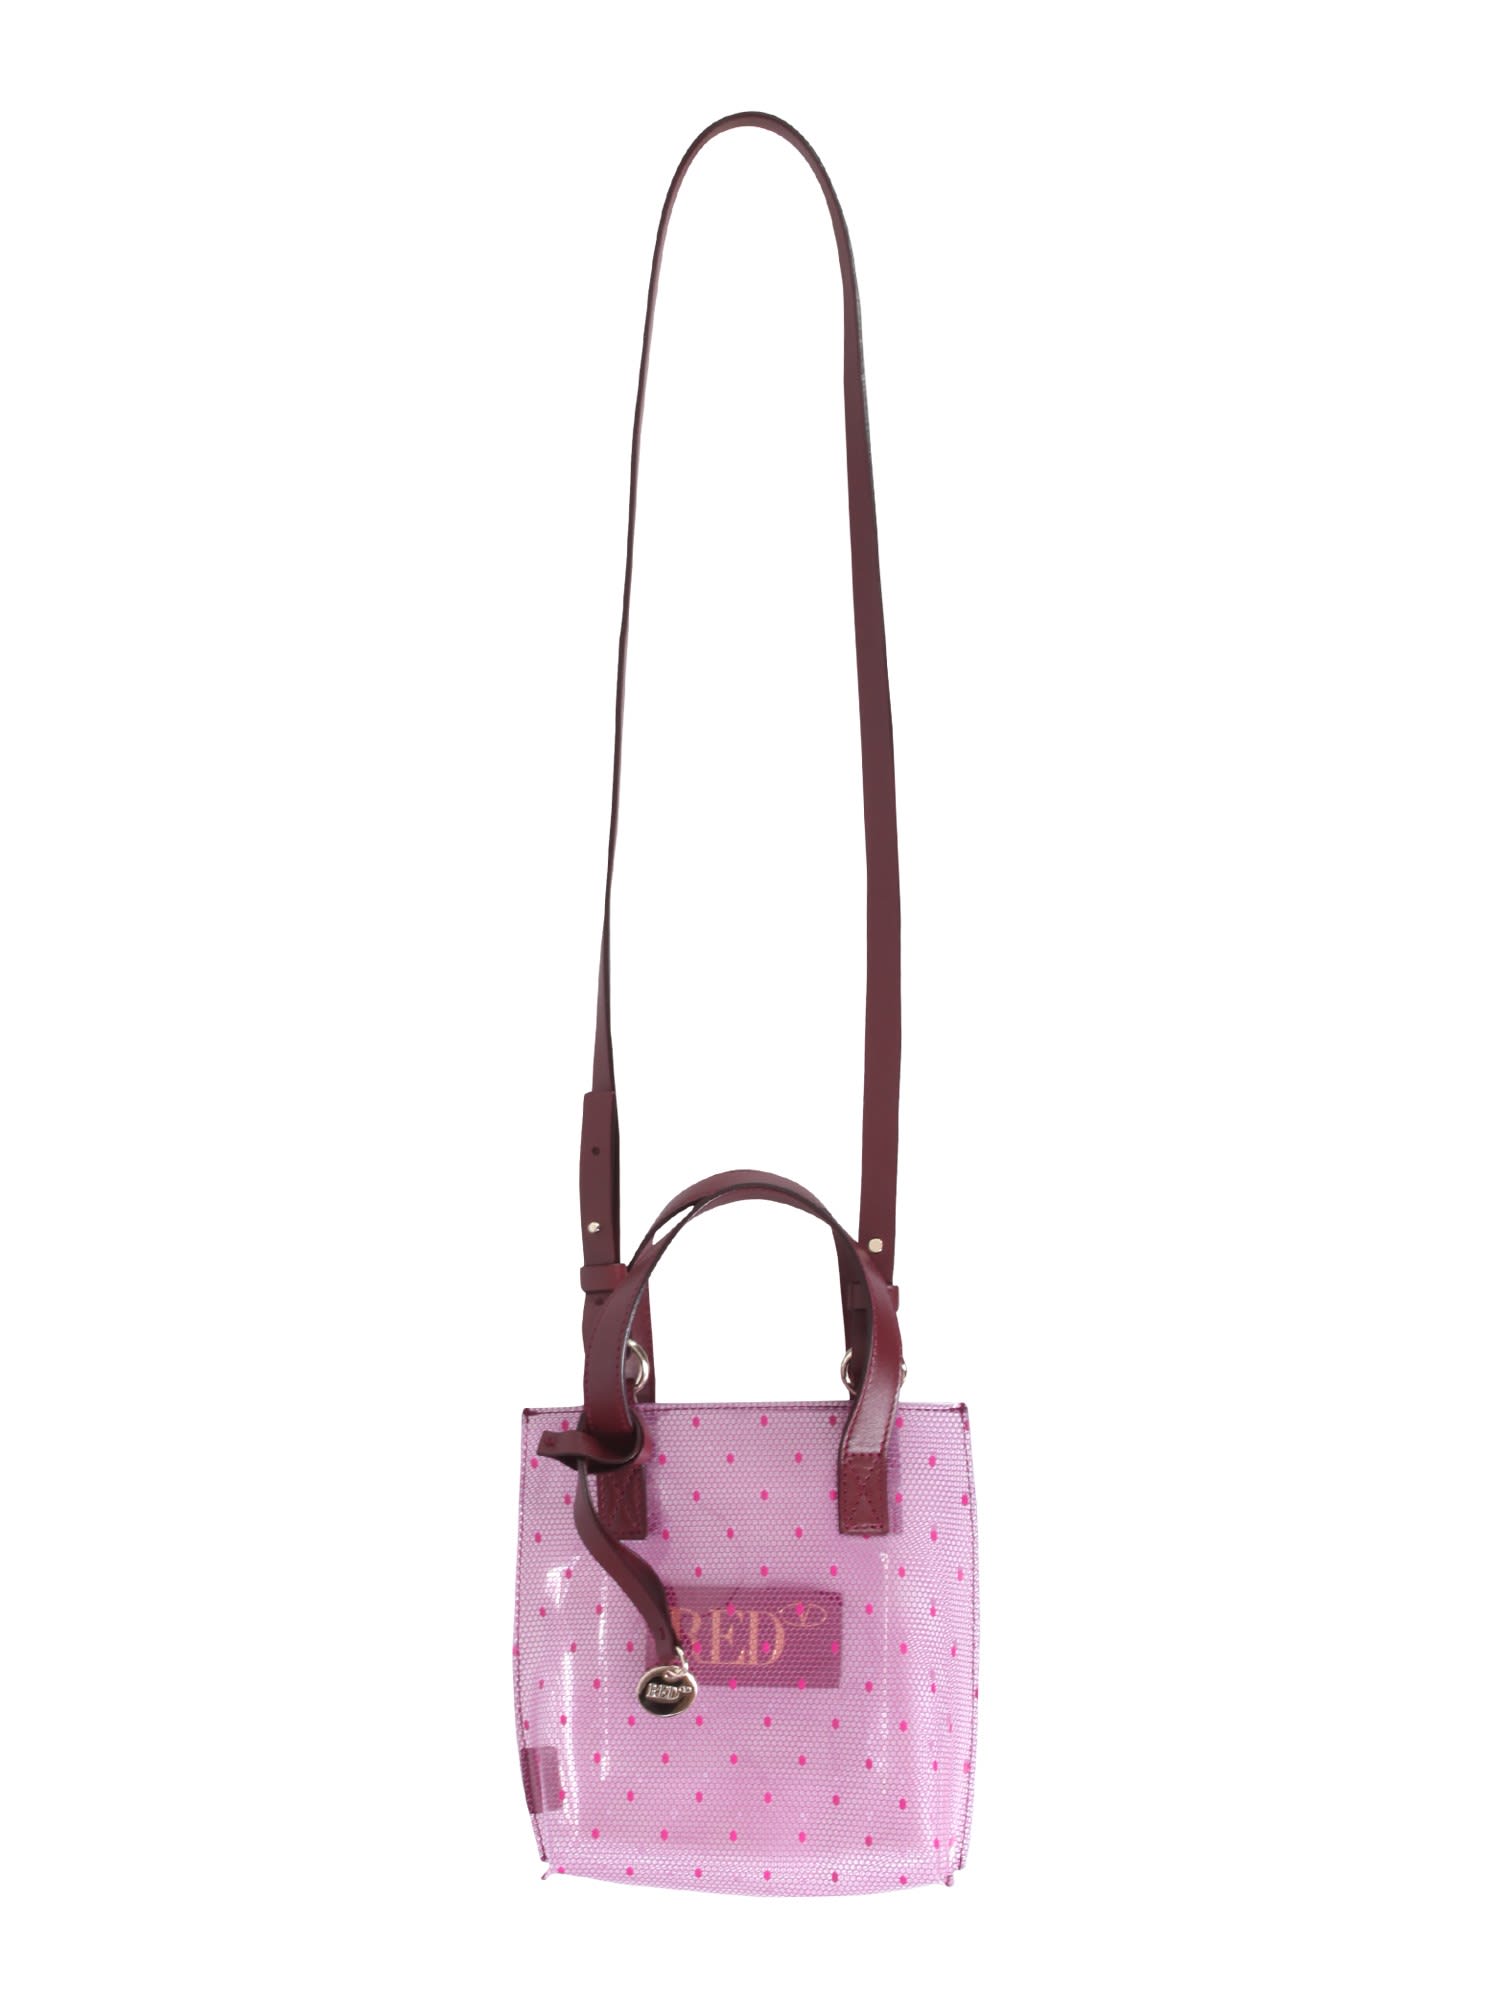 Red Valentino Tote Transparent/Nude, Tote